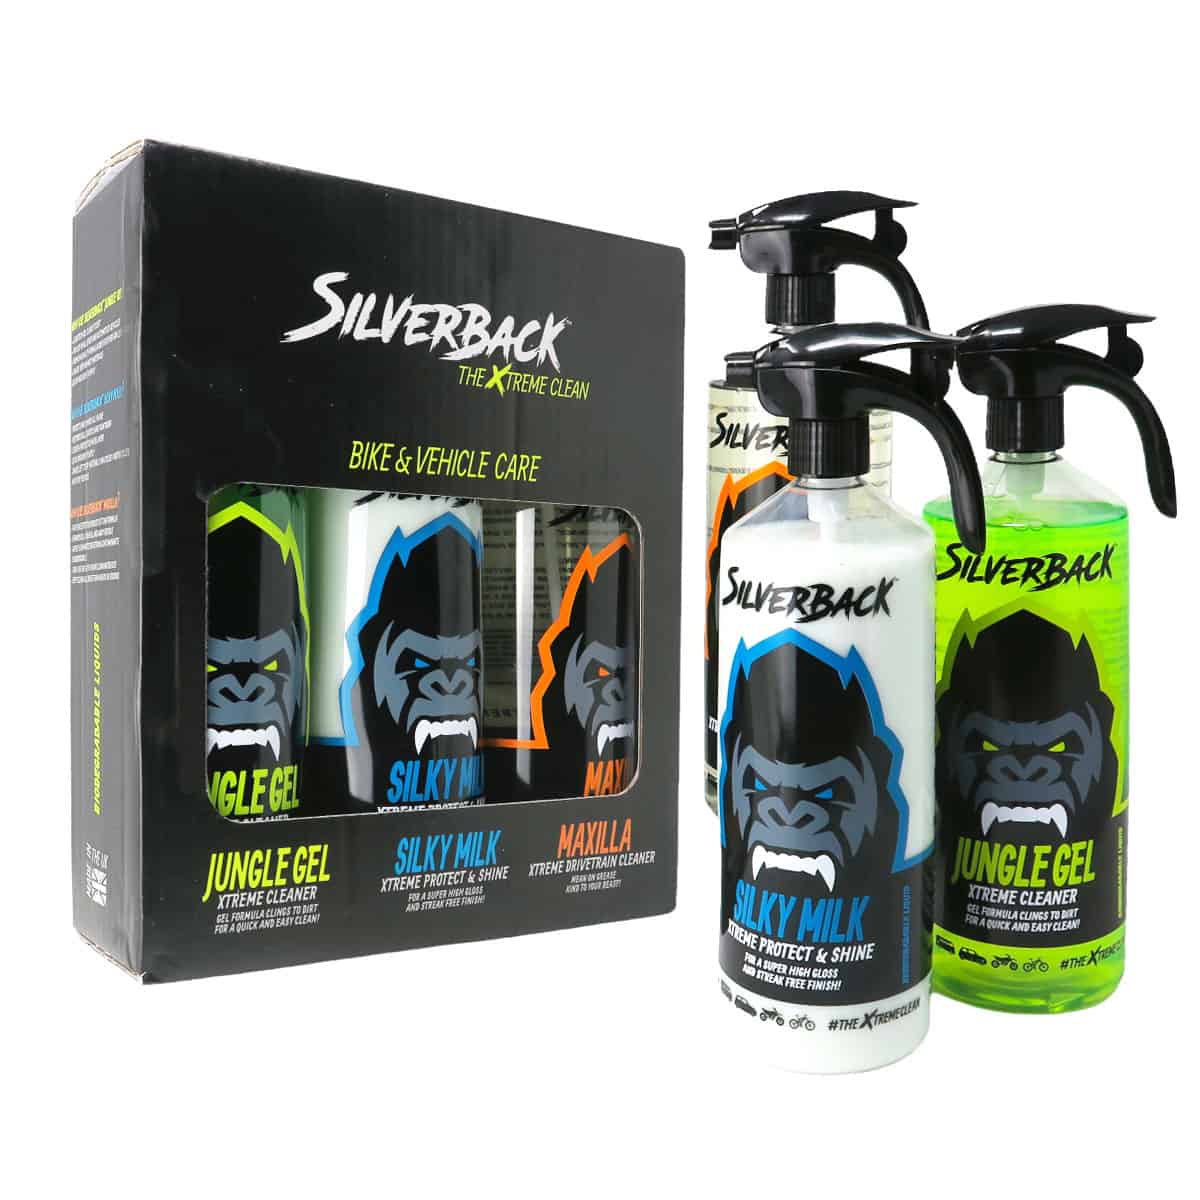 Silverback Motorcycle Cleaning Gift Box: The 3 essential treatments for your motorcycle & dirtbike 3